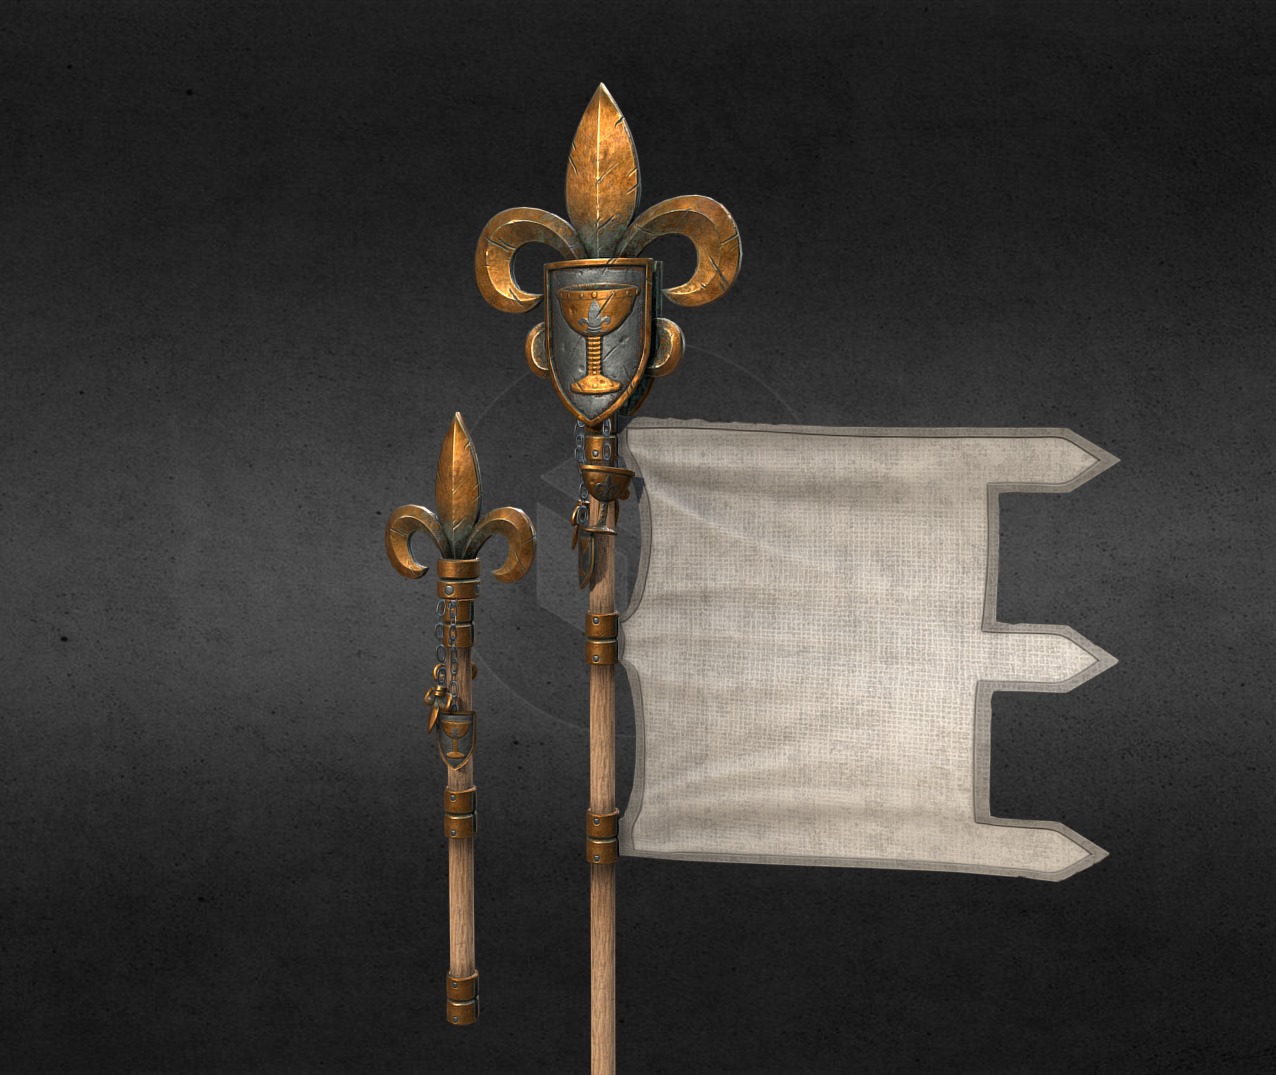 Bretonnia UI Flags I created for Creative Assembly's Warhammer - Total War game. All models and textures were created by myself 3d model